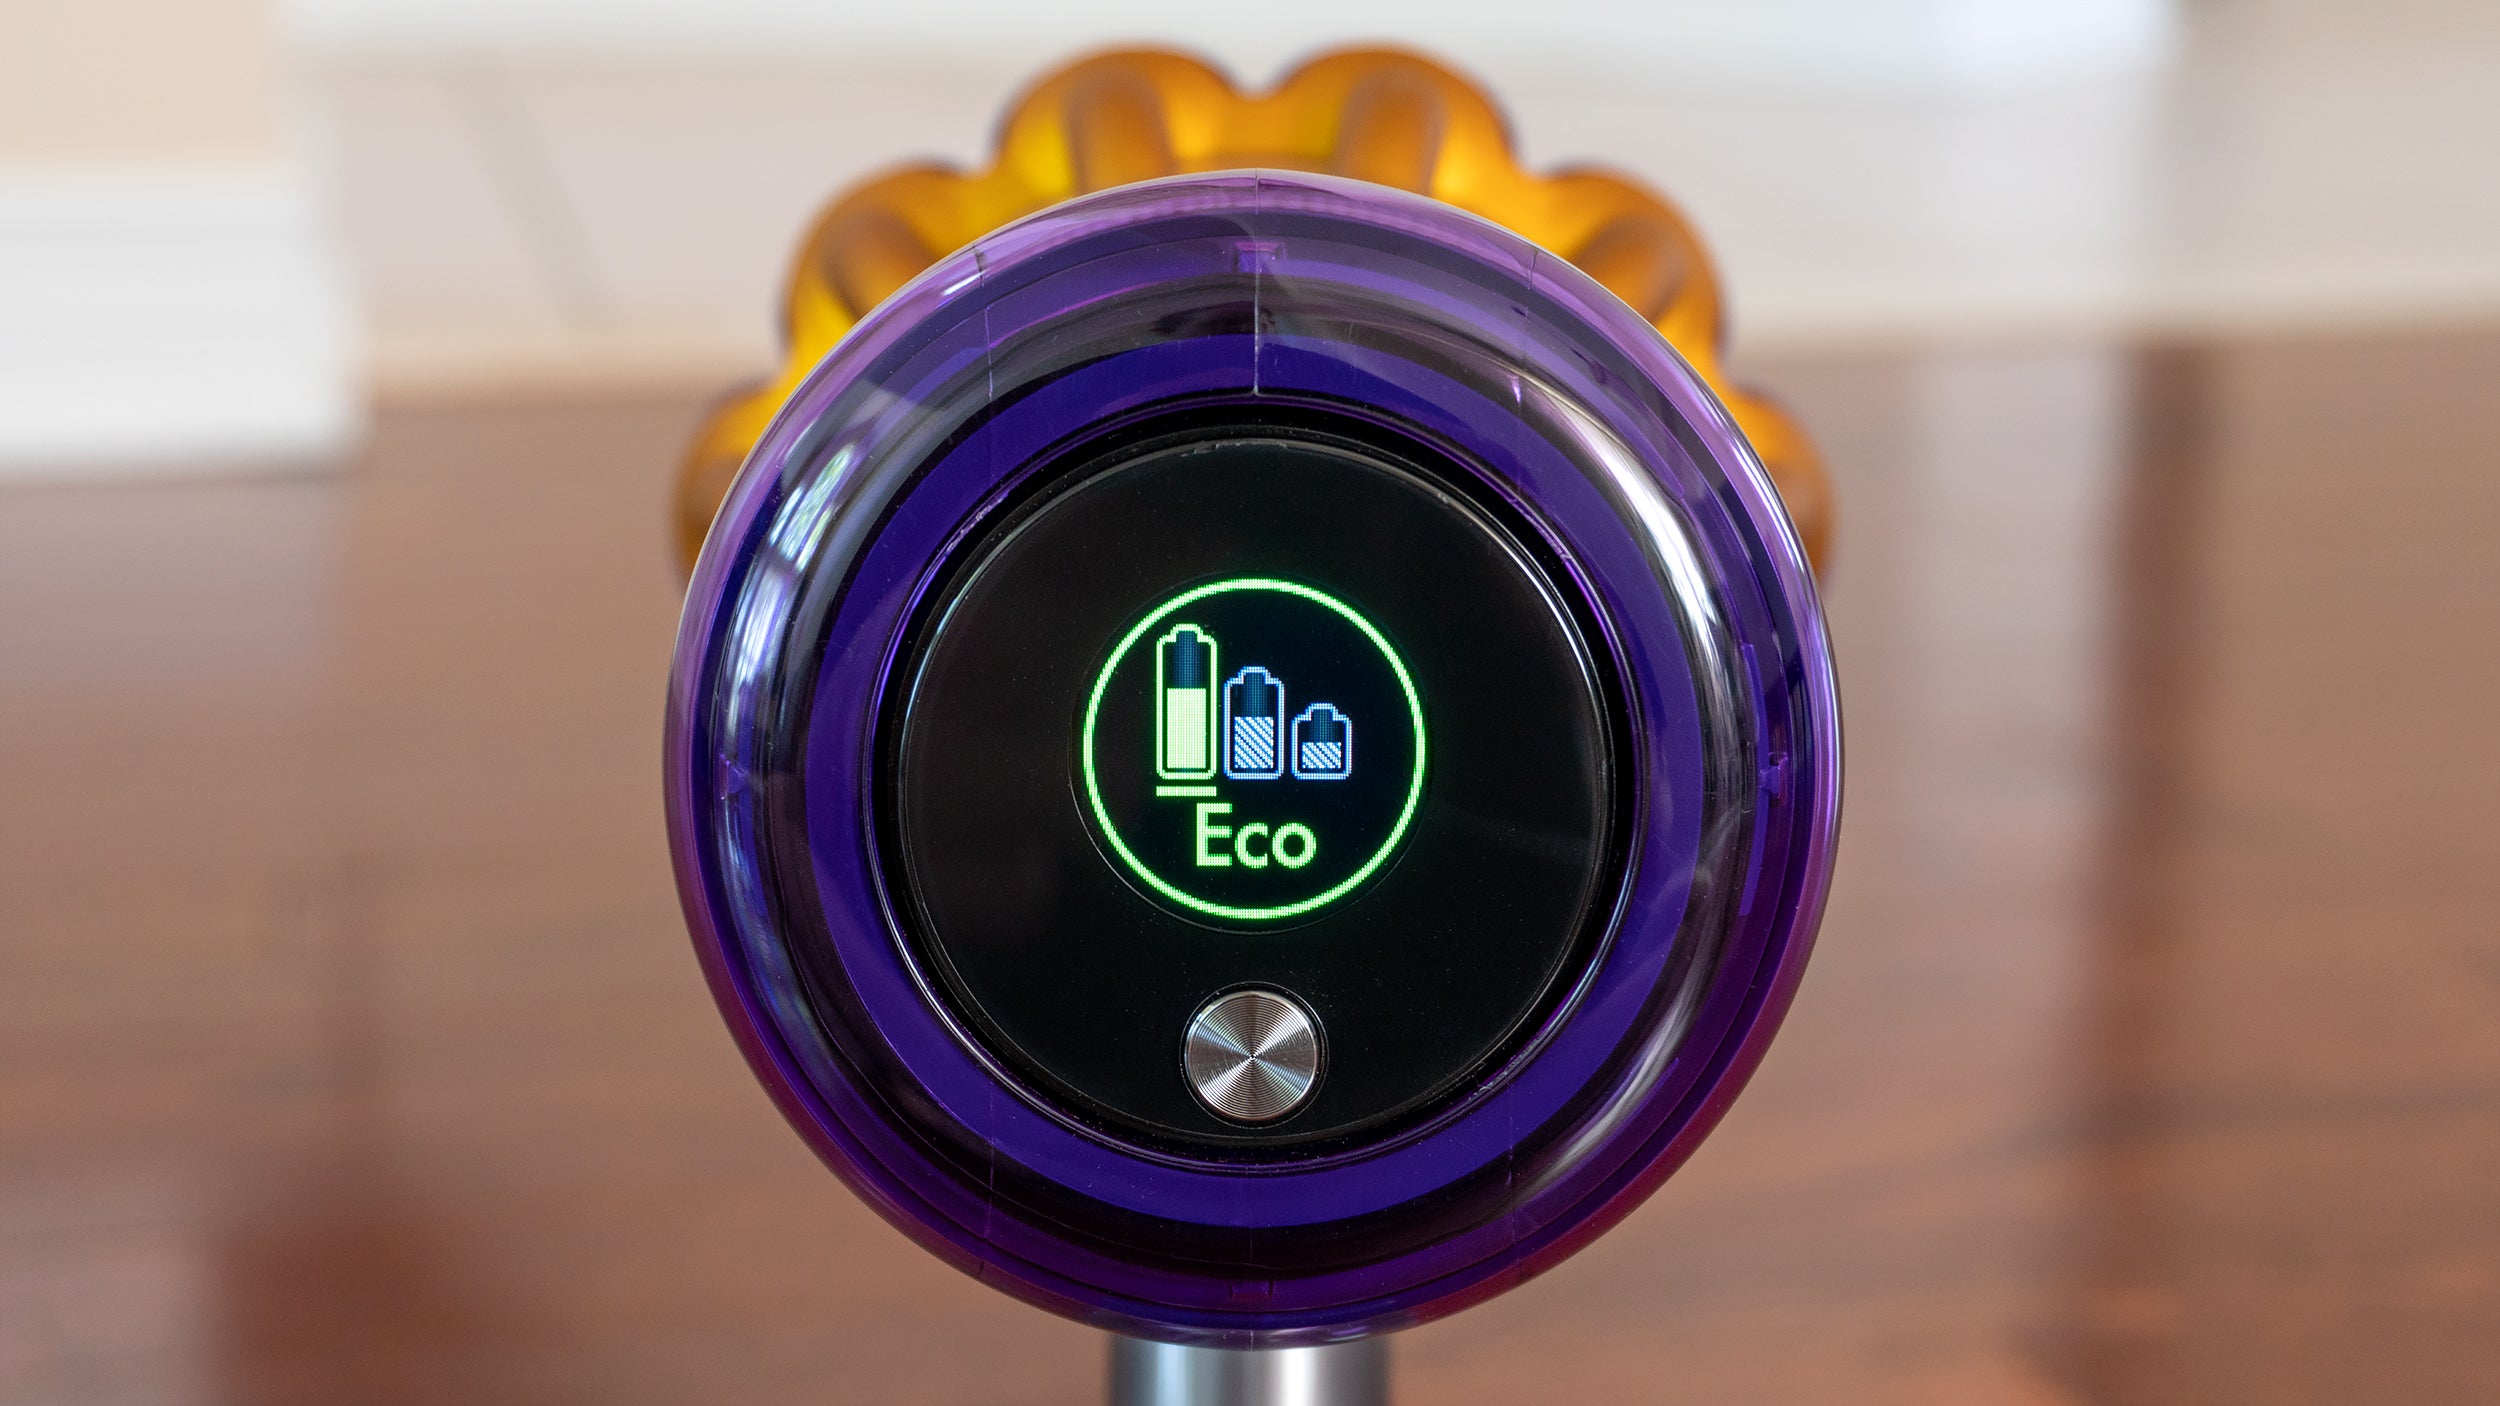 Three cleaning modes are available: Eco, Auto, and Boost for your worst messes. (Photo: Andrew Liszewski/Gizmodo)